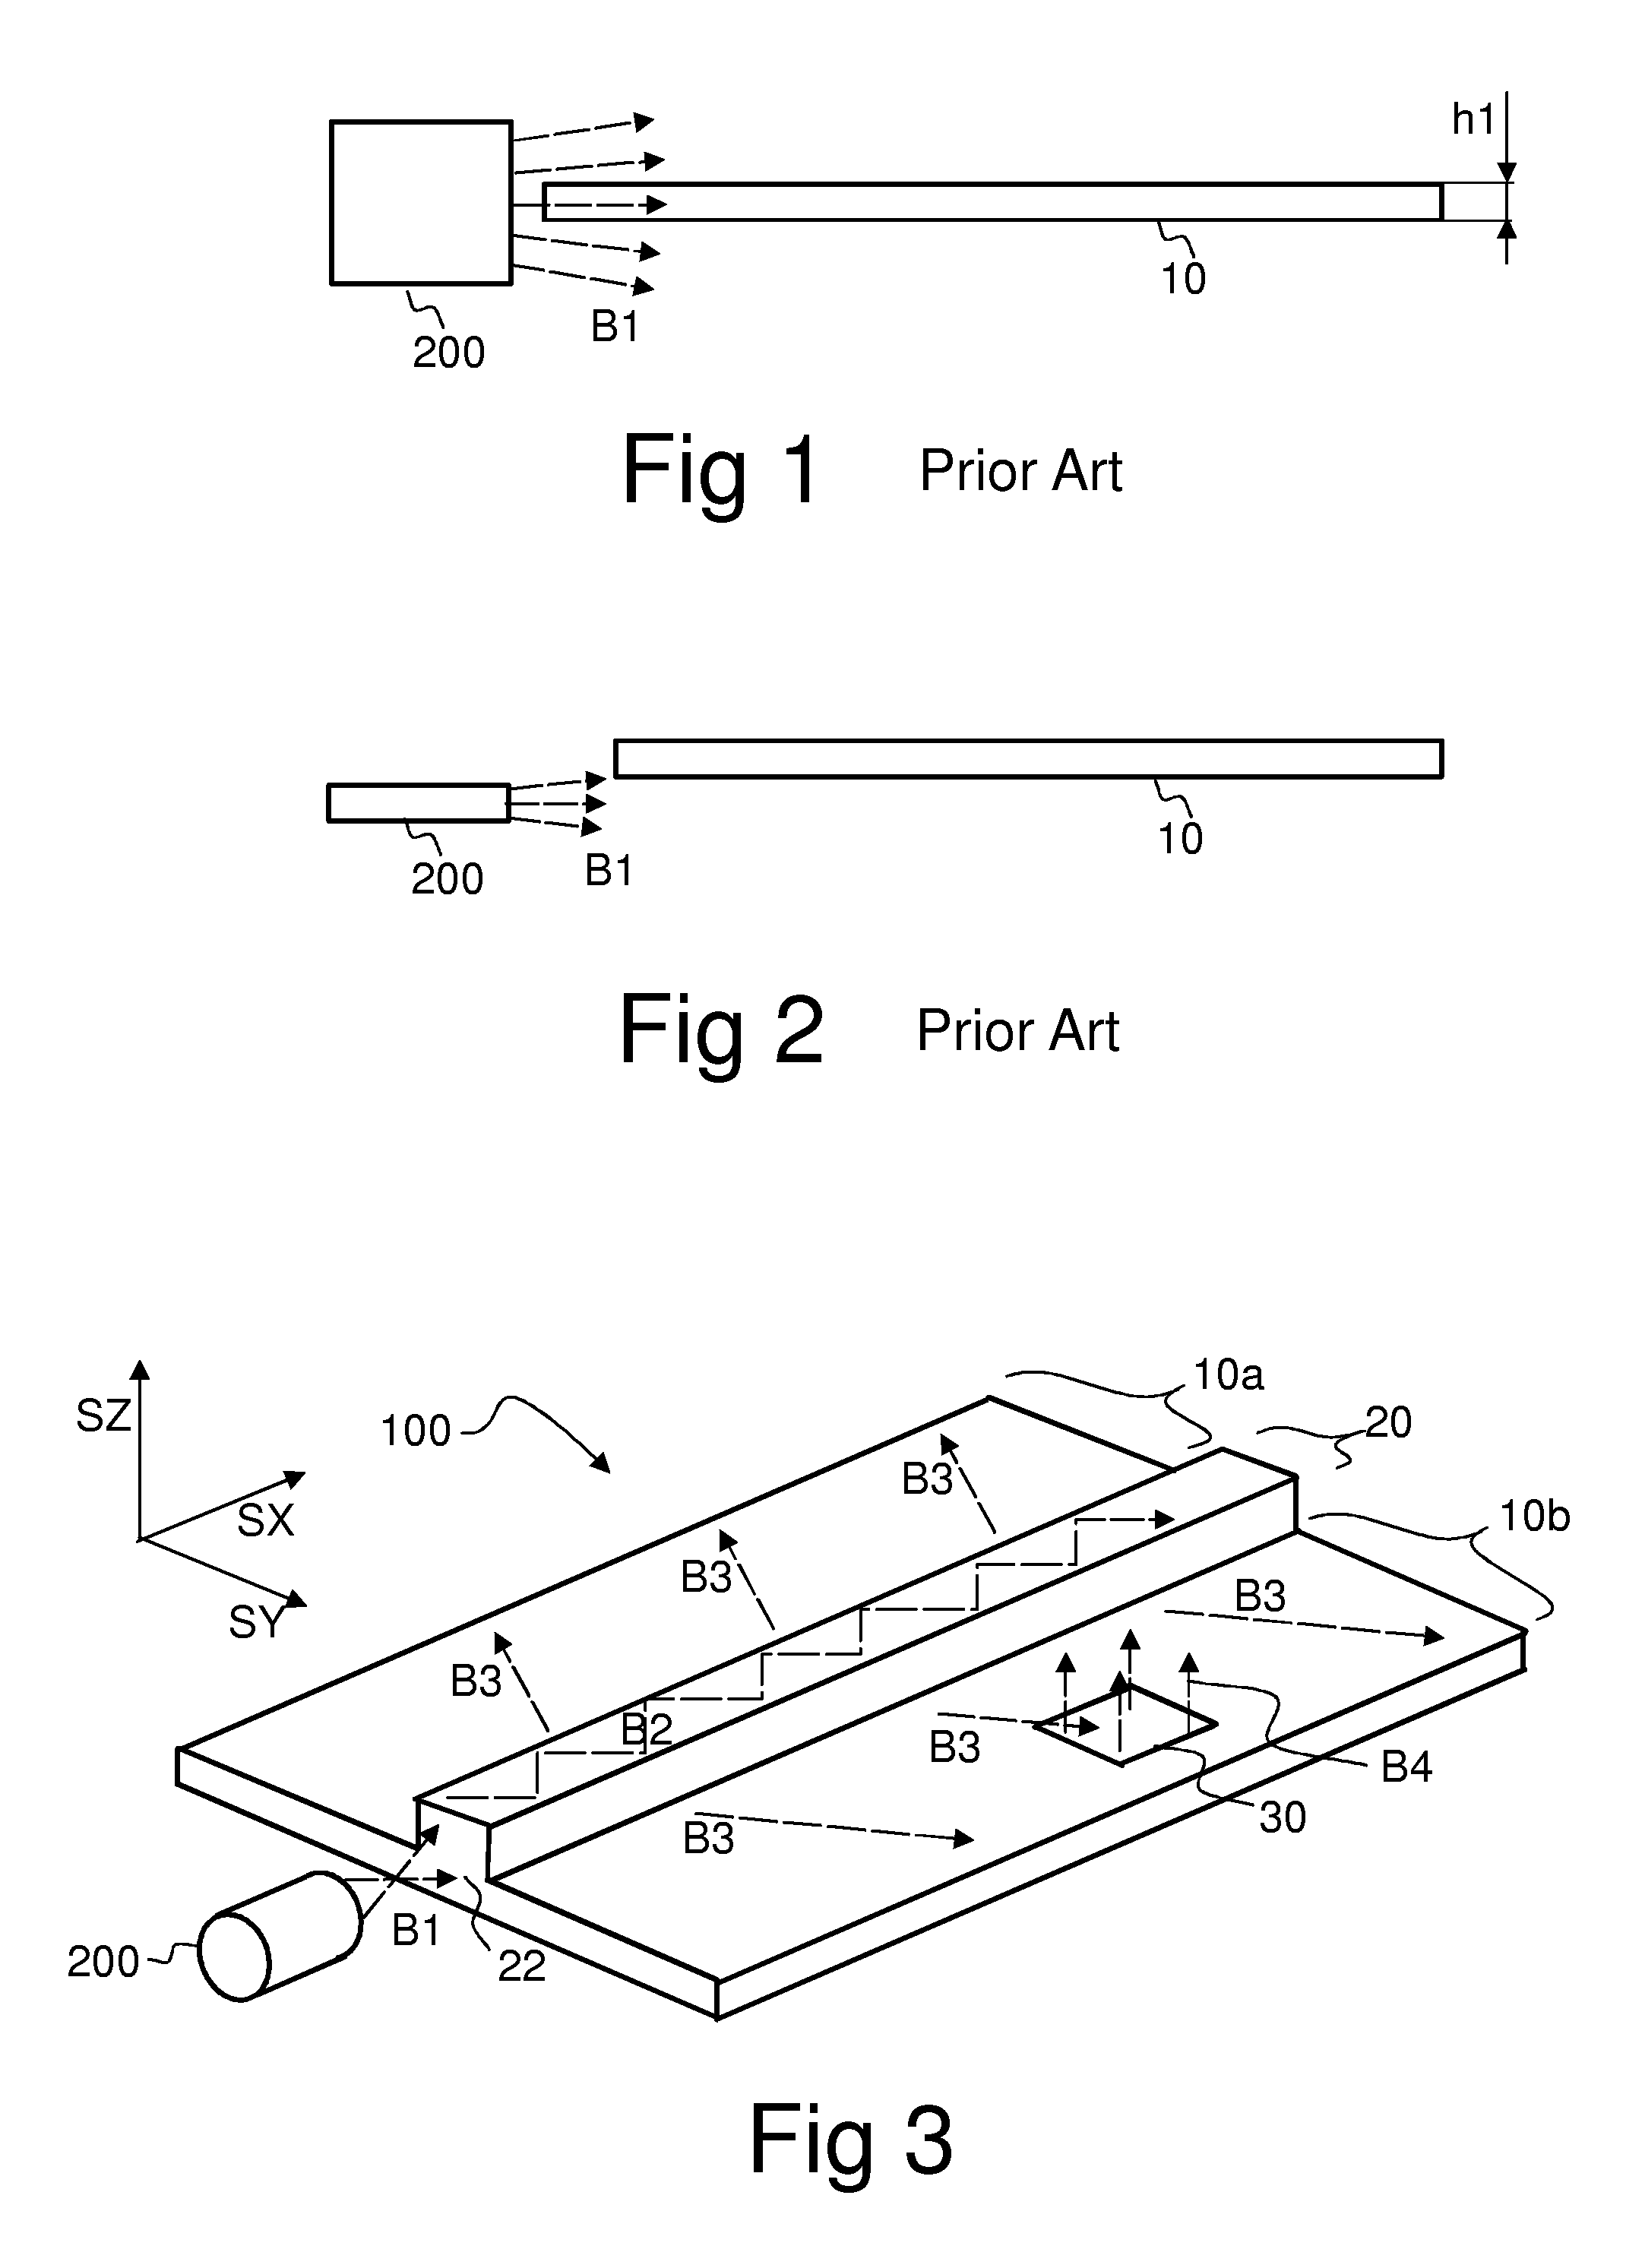 Method for coupling light into a thin planar waveguide